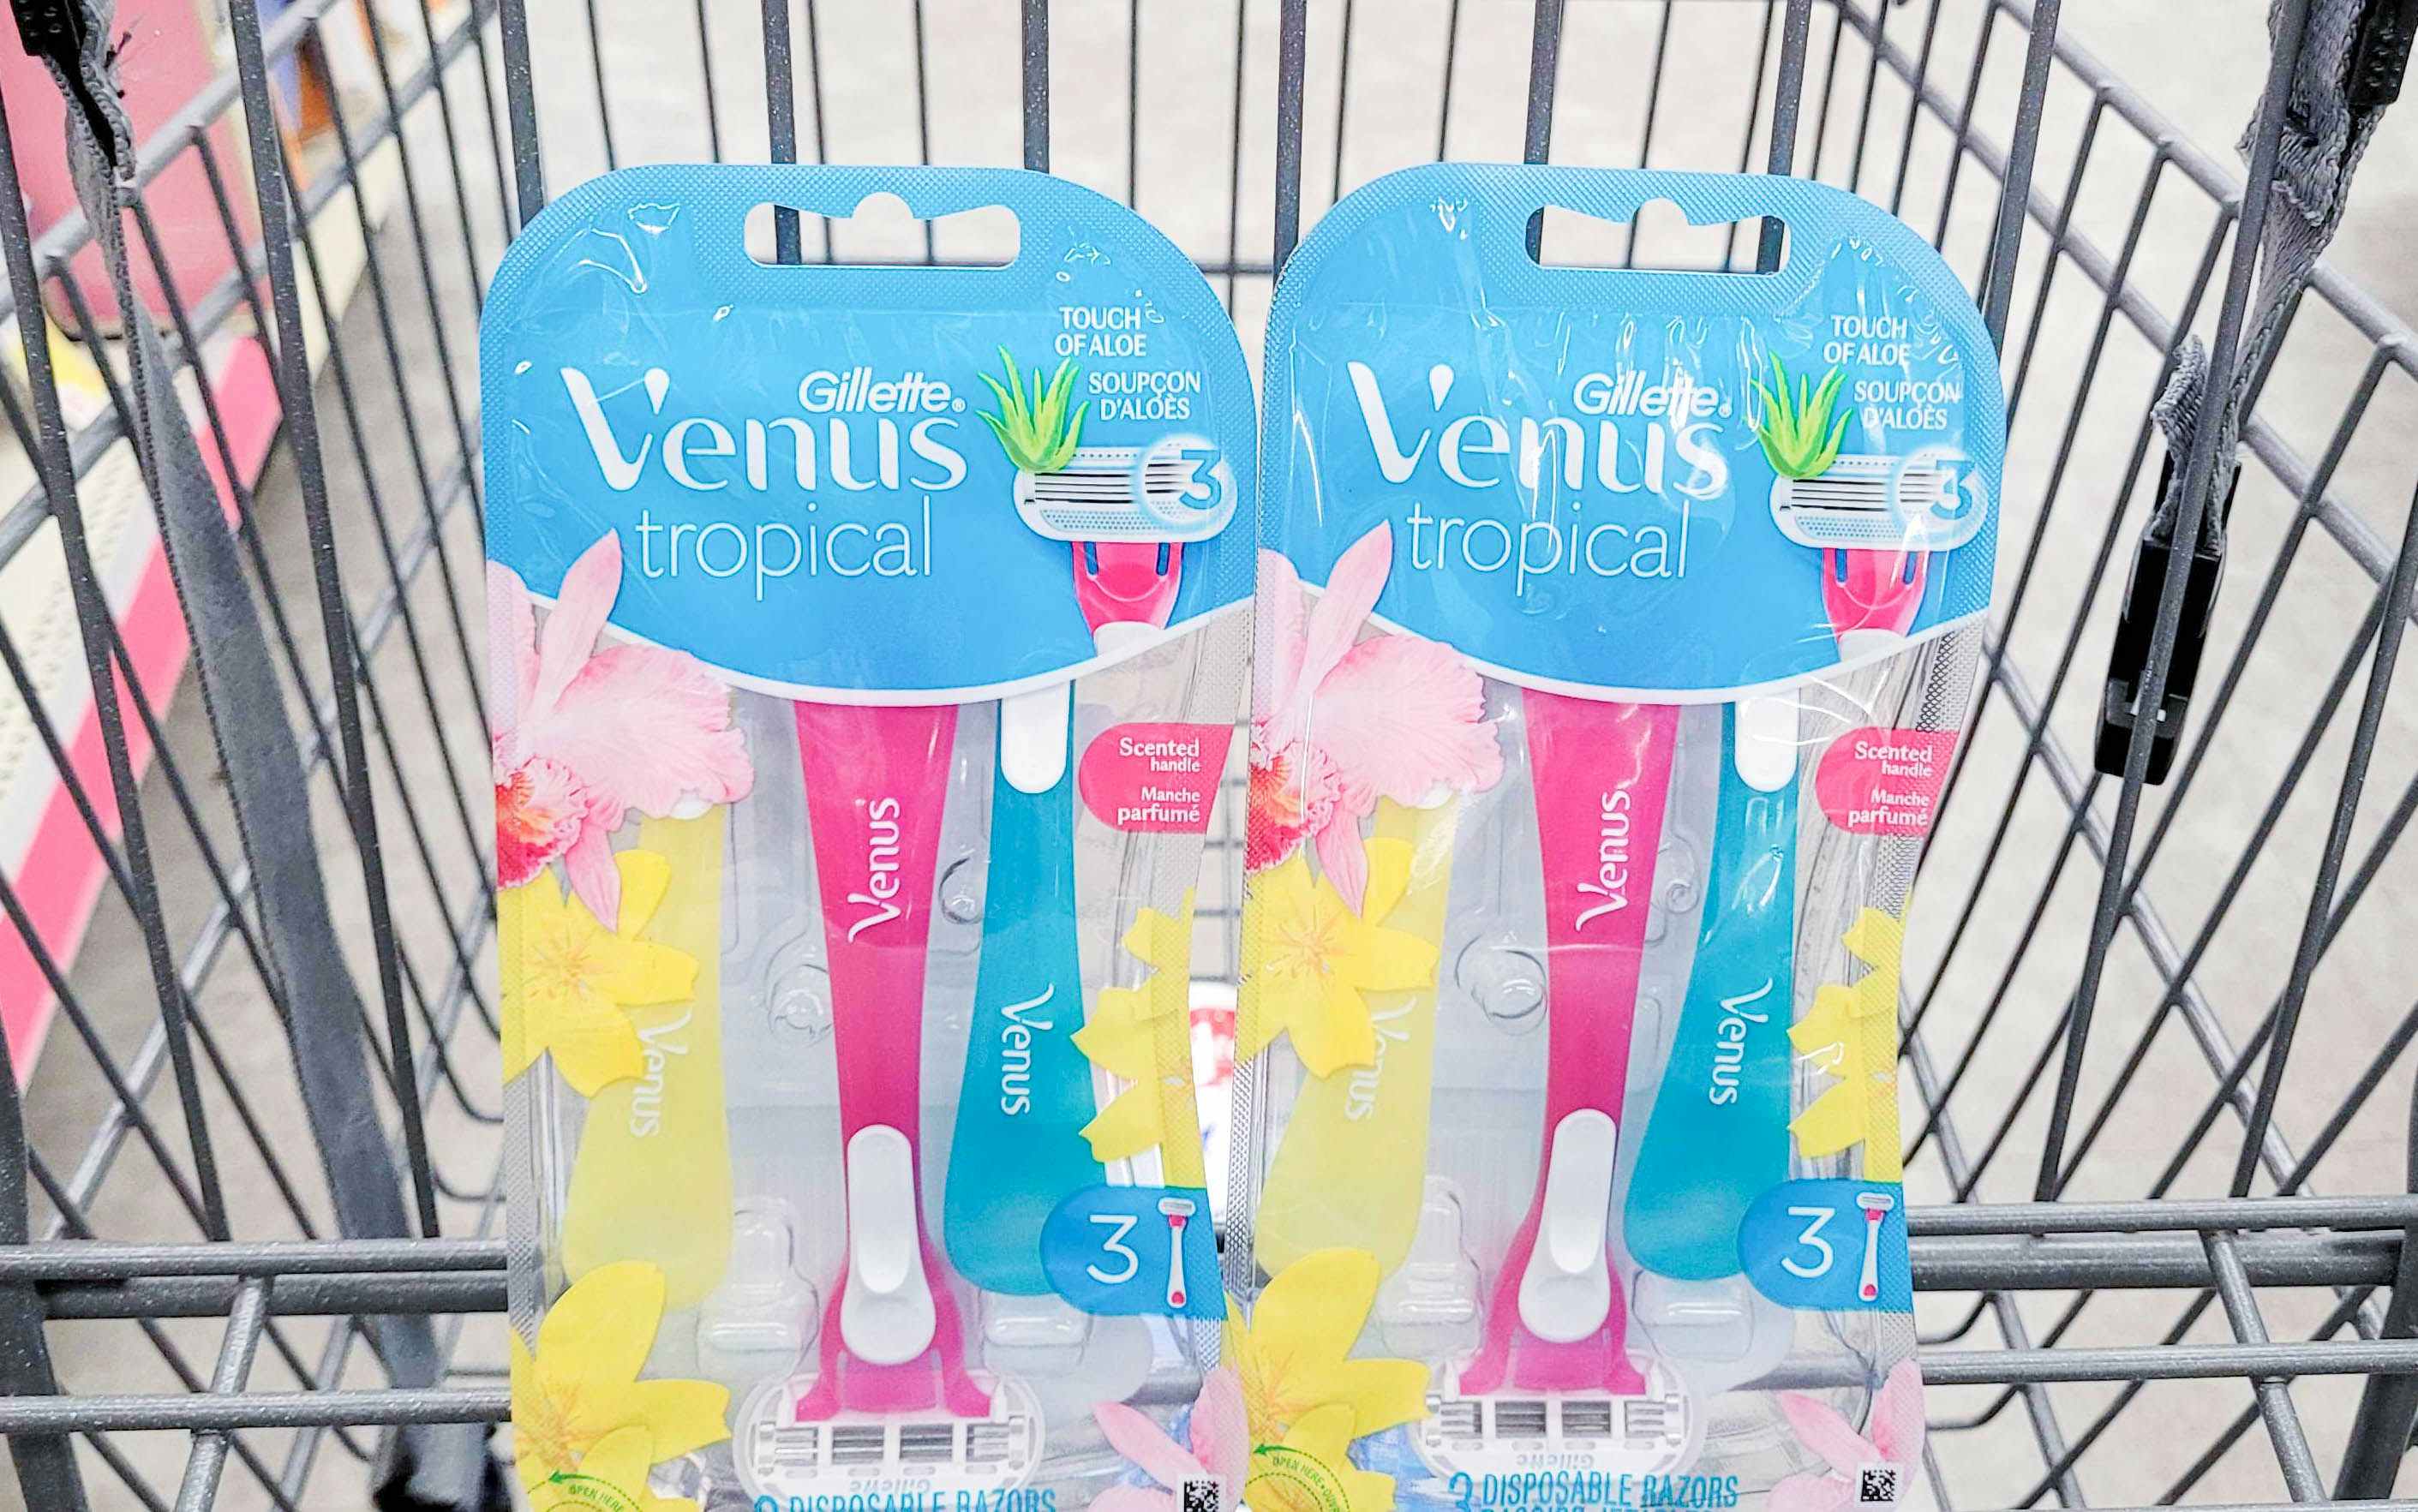 two packs of Gillette Venus Tropical disposable razors in shopping cart